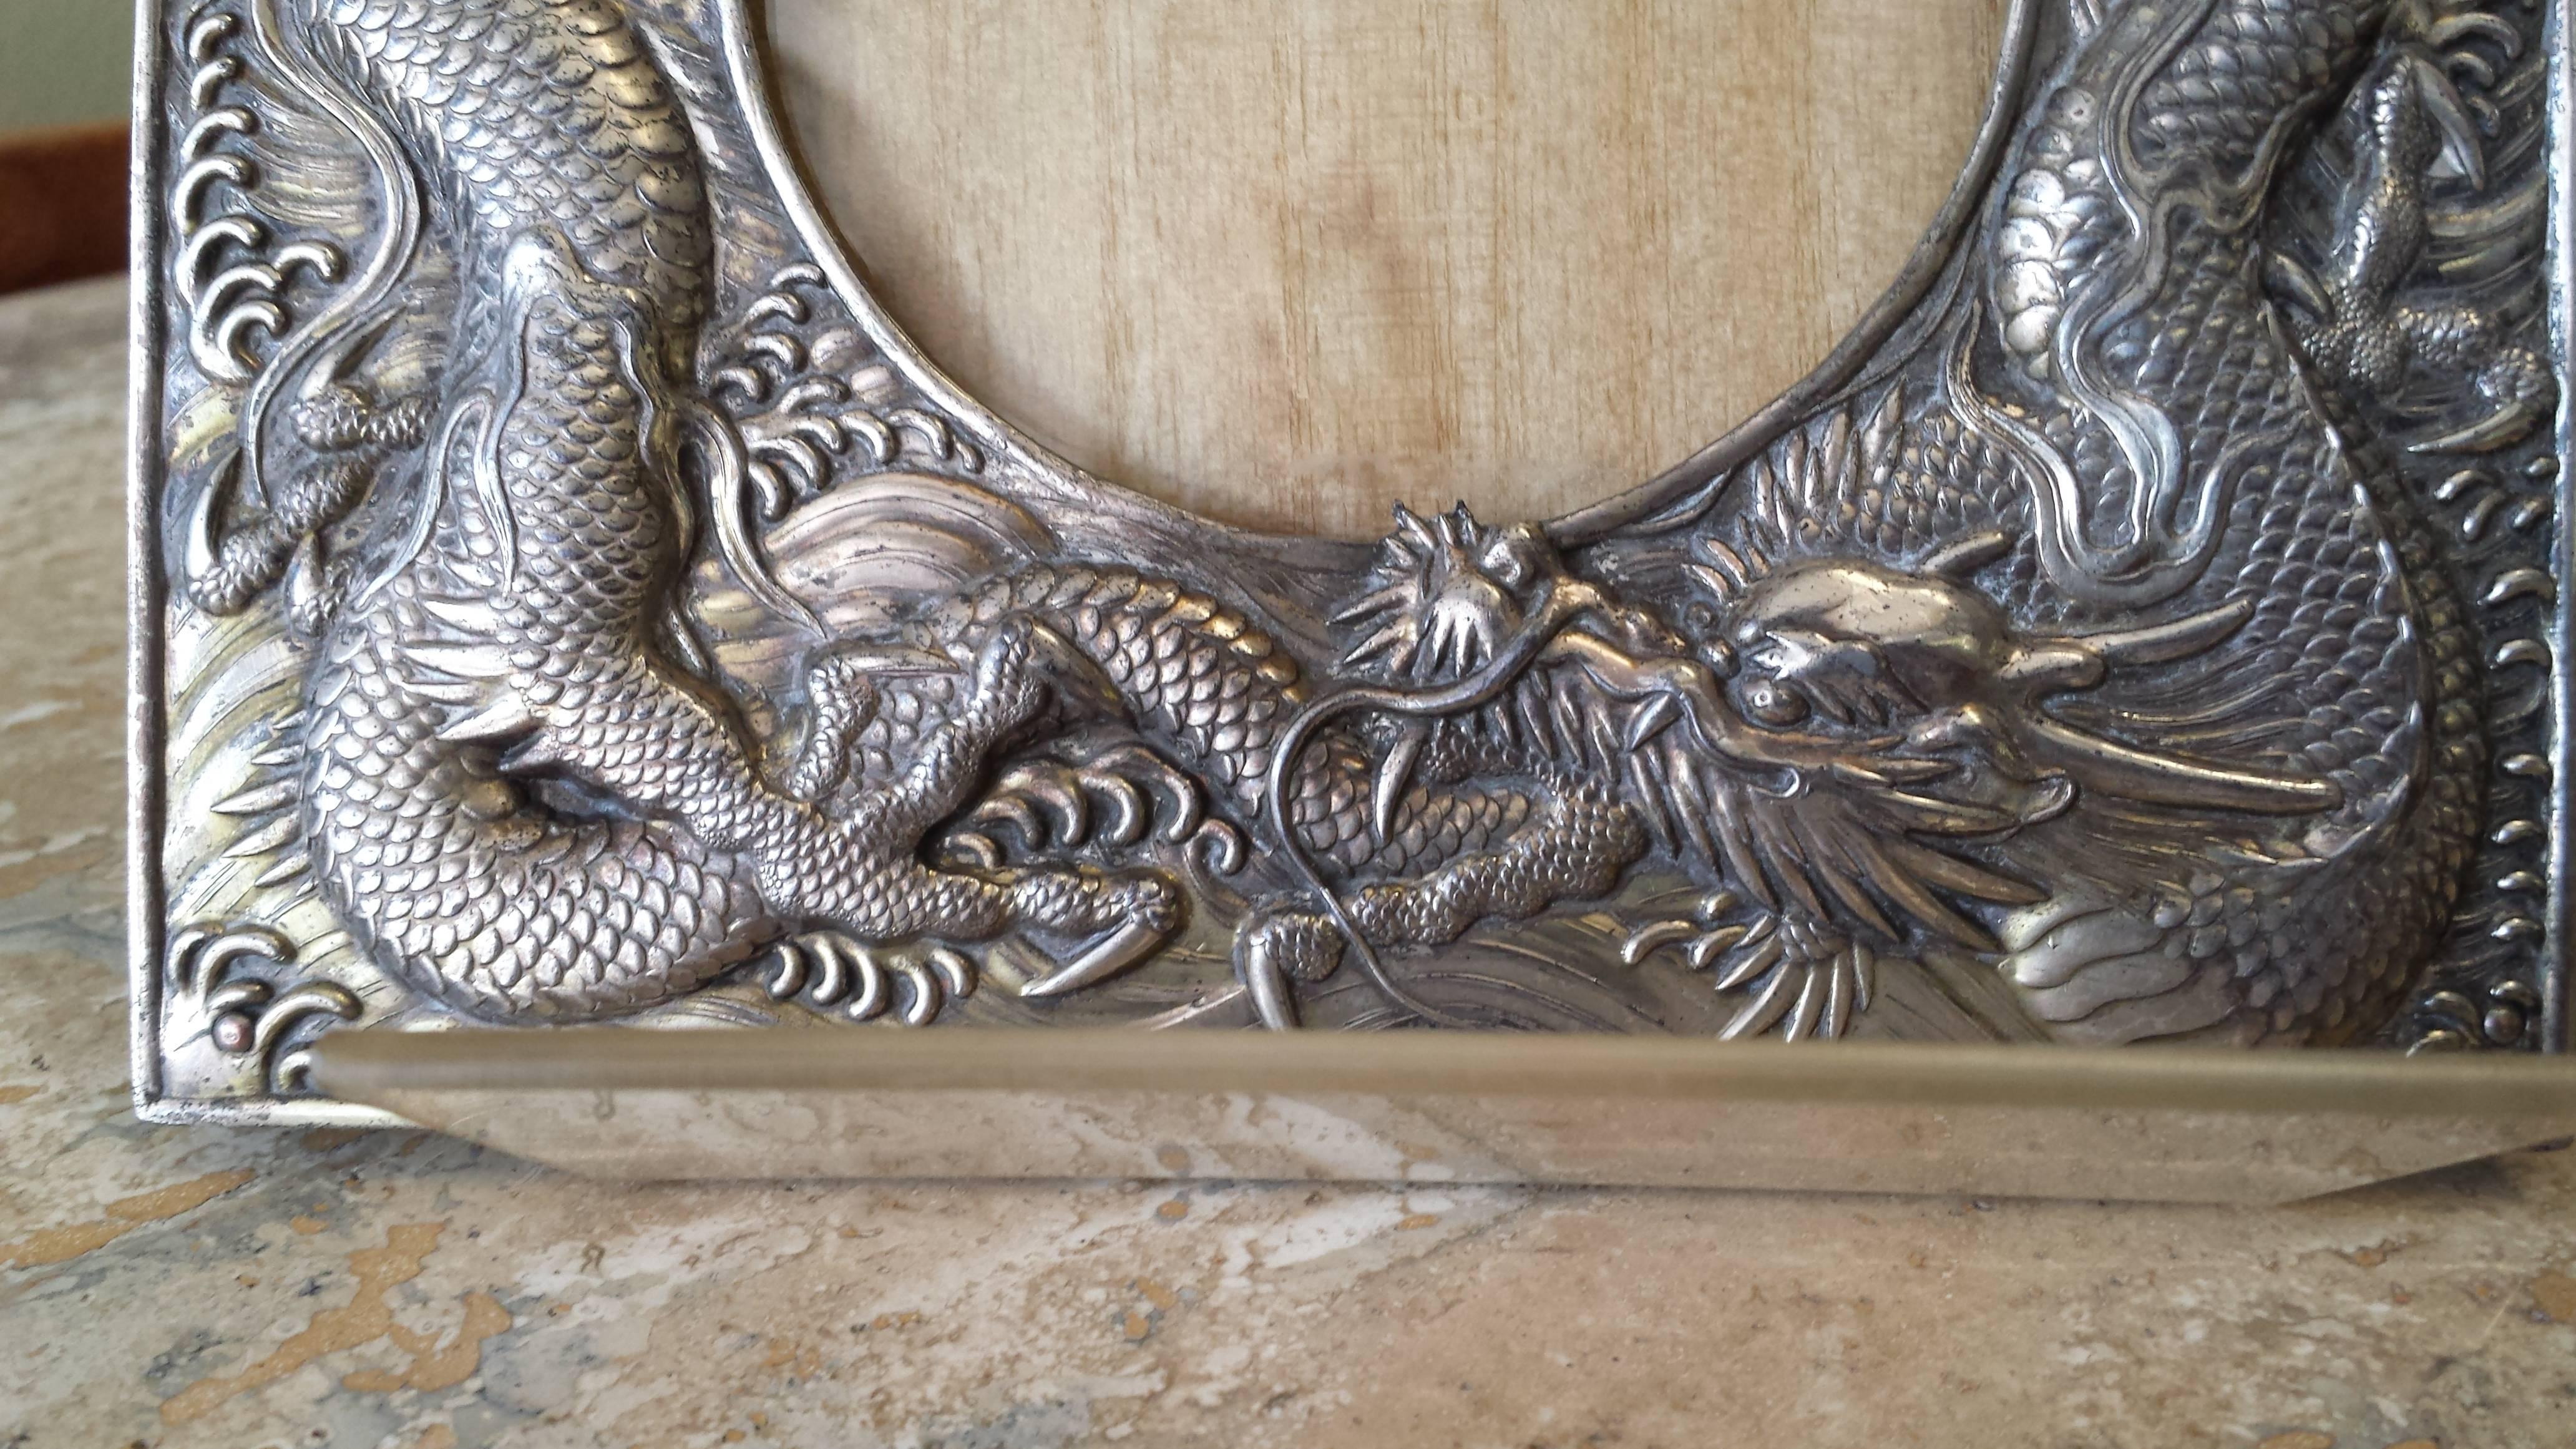 Stunning raised double dragon picture frame in a silver/gilt old finish, circa 1900-1910. The frame is flanked by two dragons and flanks a round picture hole, the back is in original vinyl covering and wire. The frame measures 5 7/8